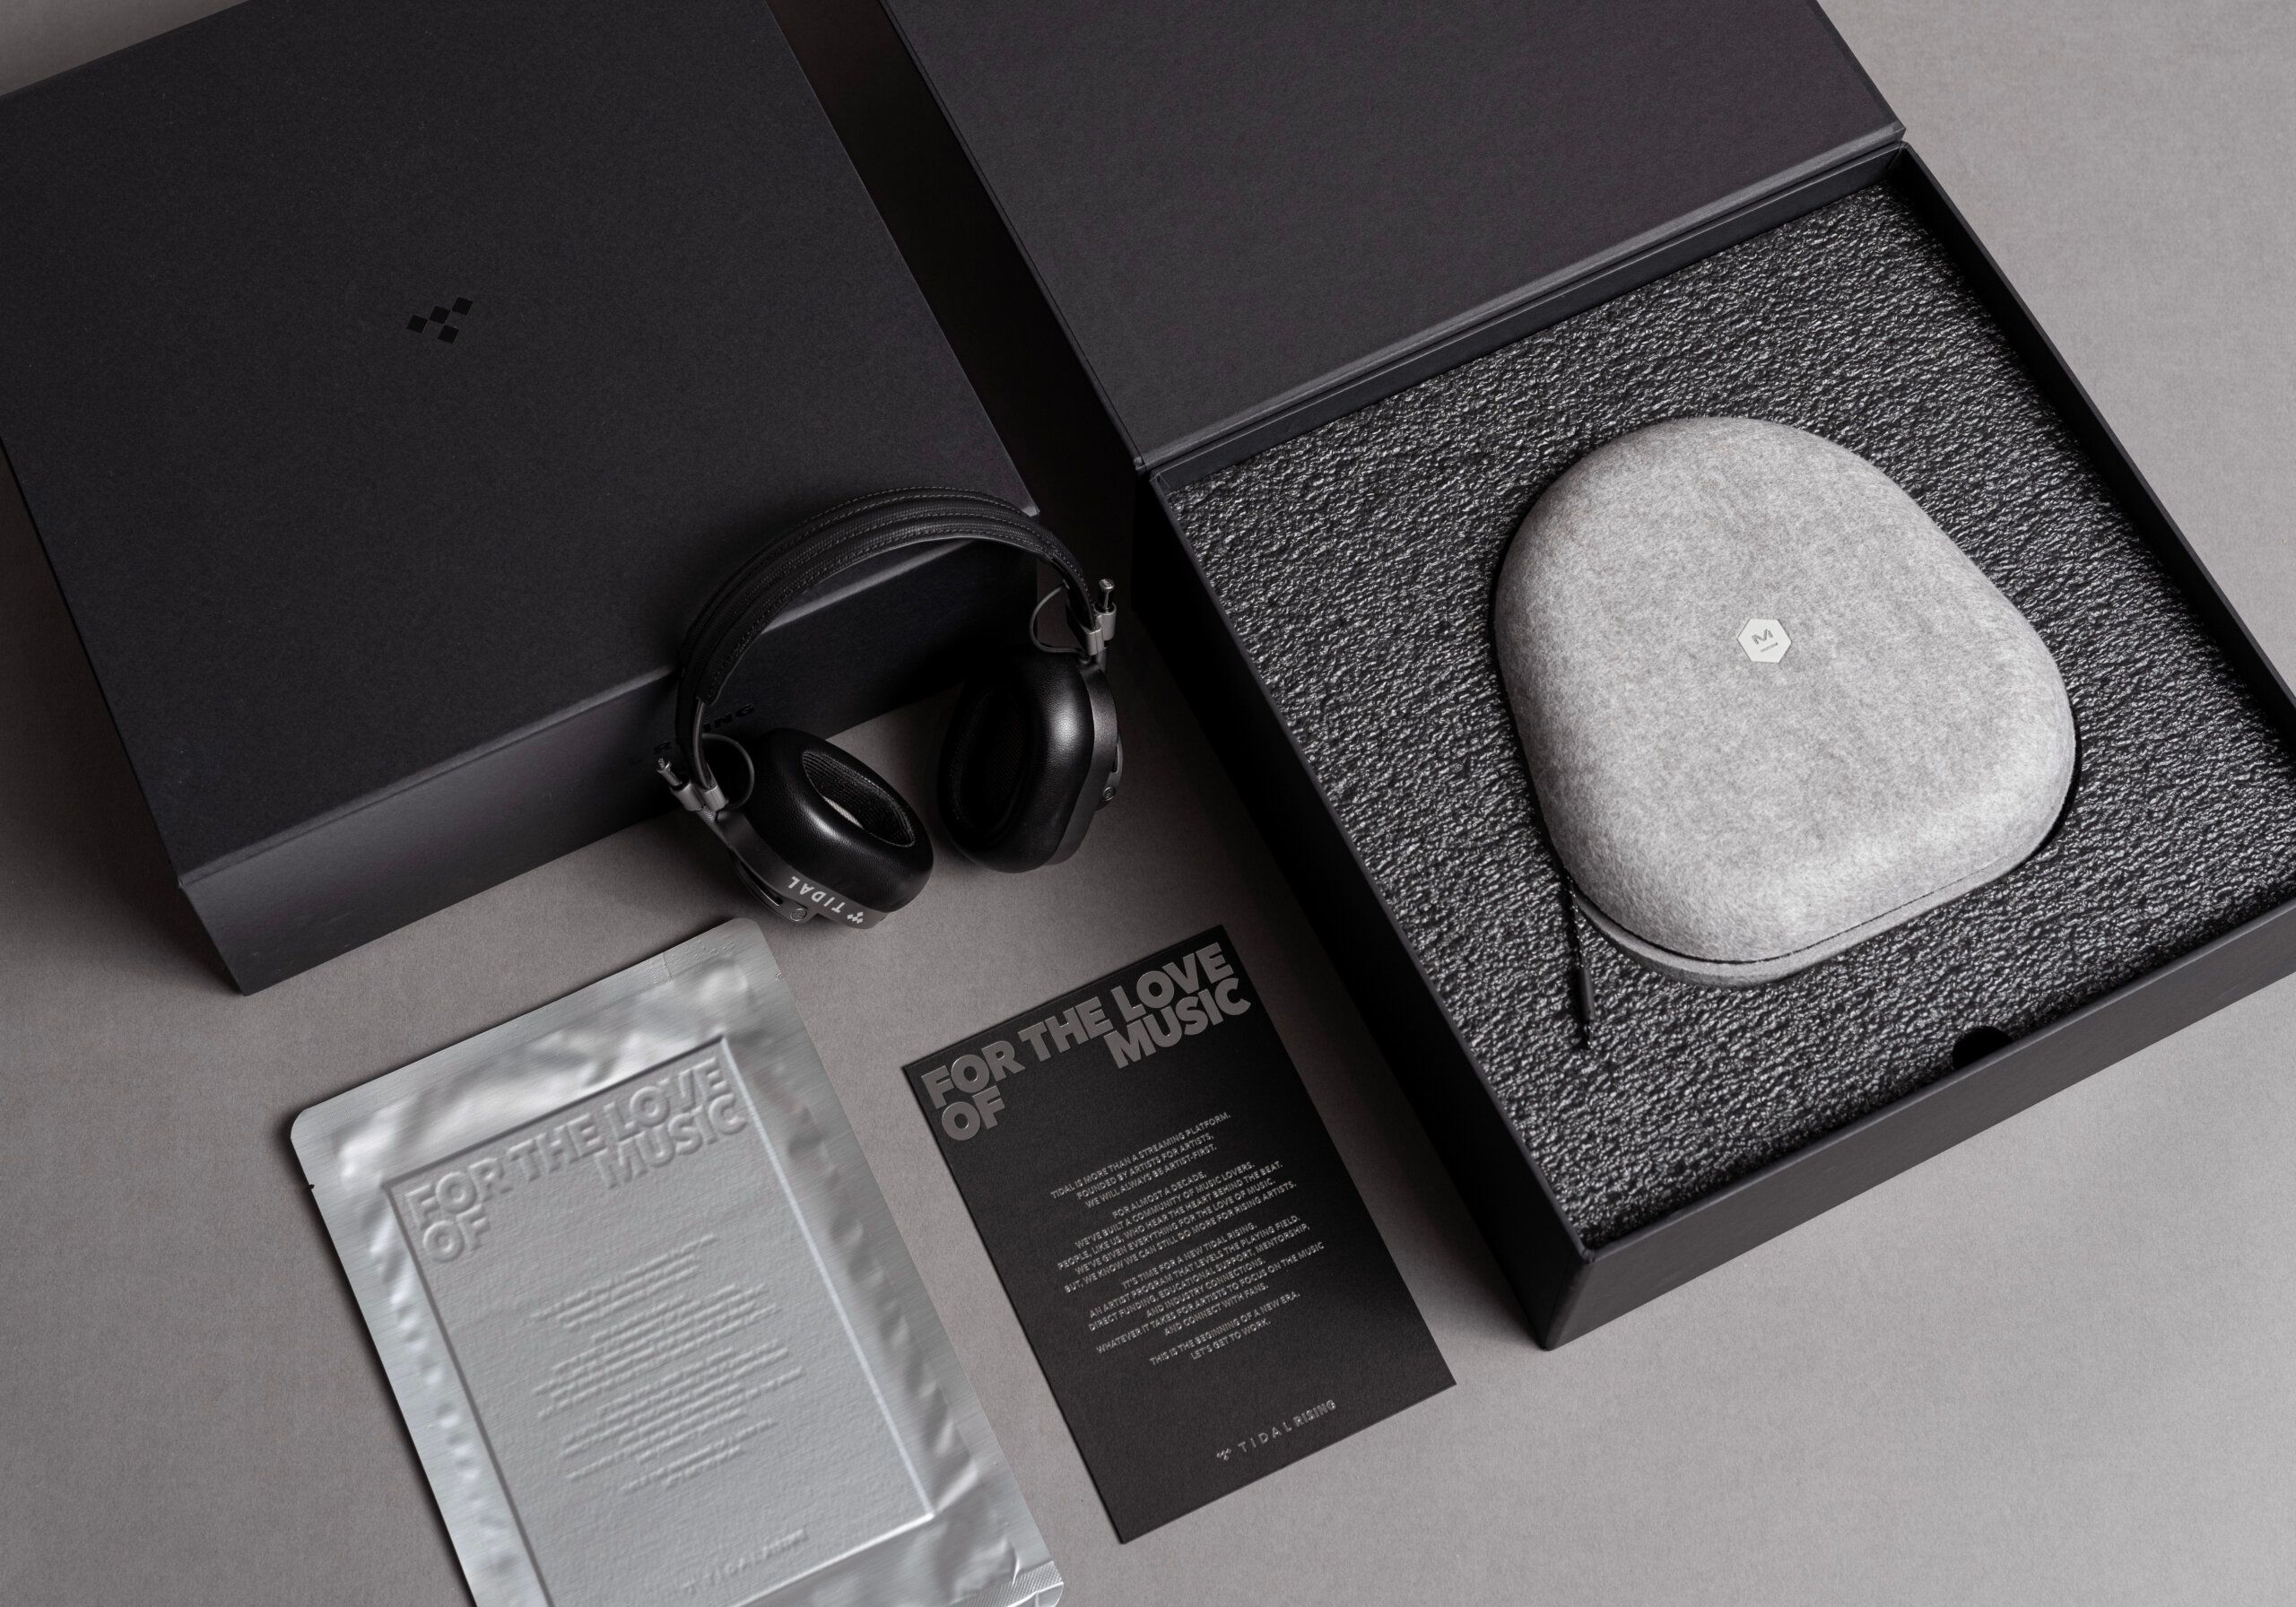 Black promo box for tidal showing headphones and bluetooth speaker along with vaccuum sealed letterpress For the love of music letter.